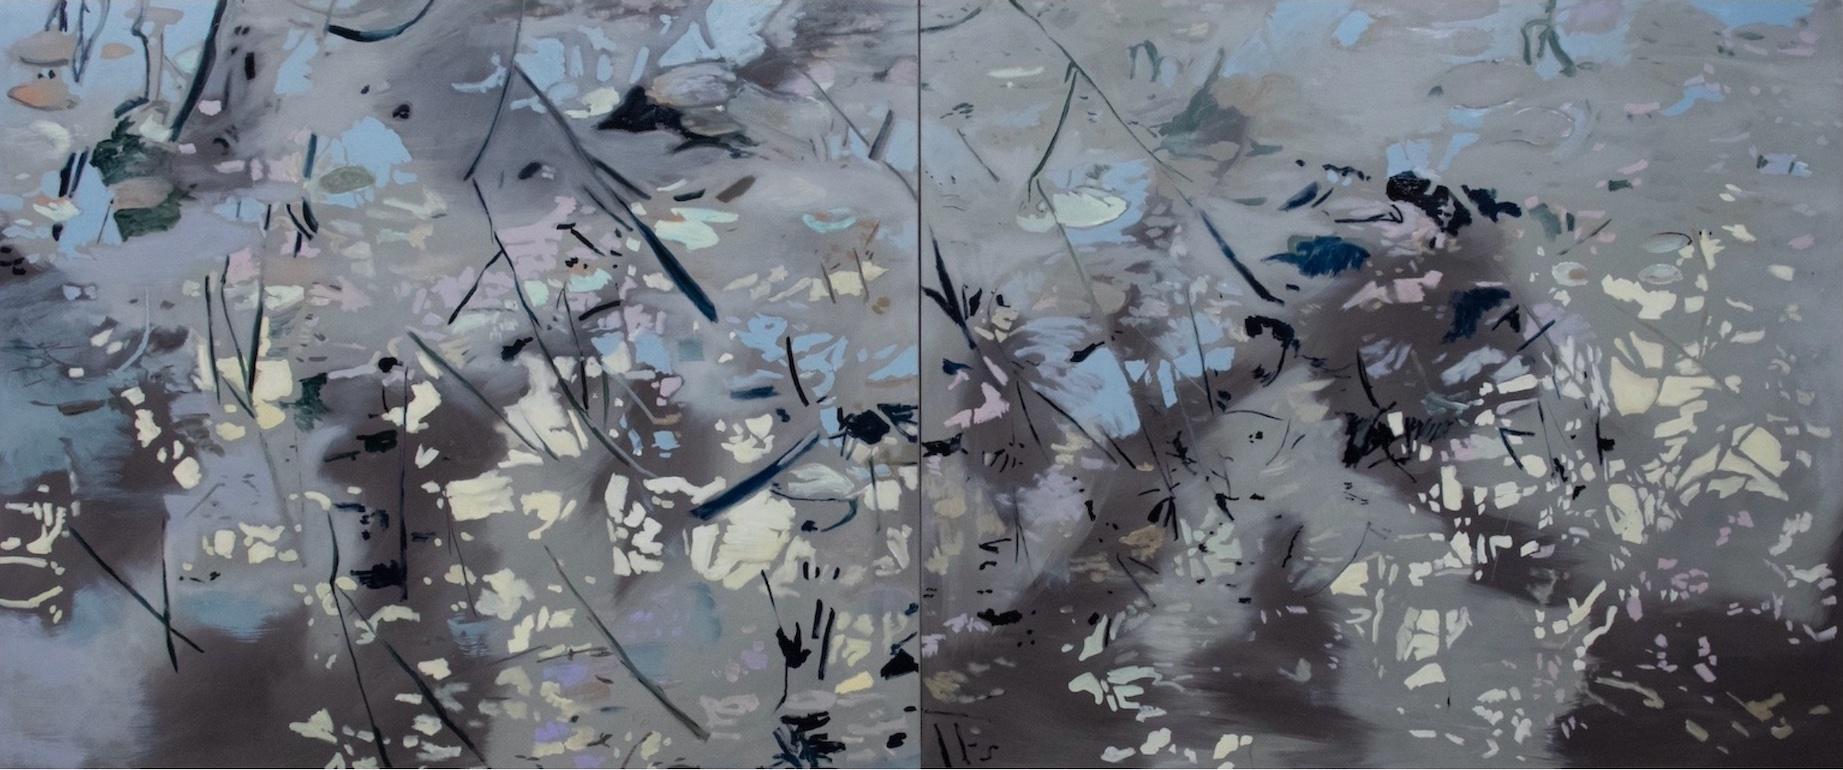 Antonio Ugarte Abstract Painting - Poiret Water -72 X 180 Diptych